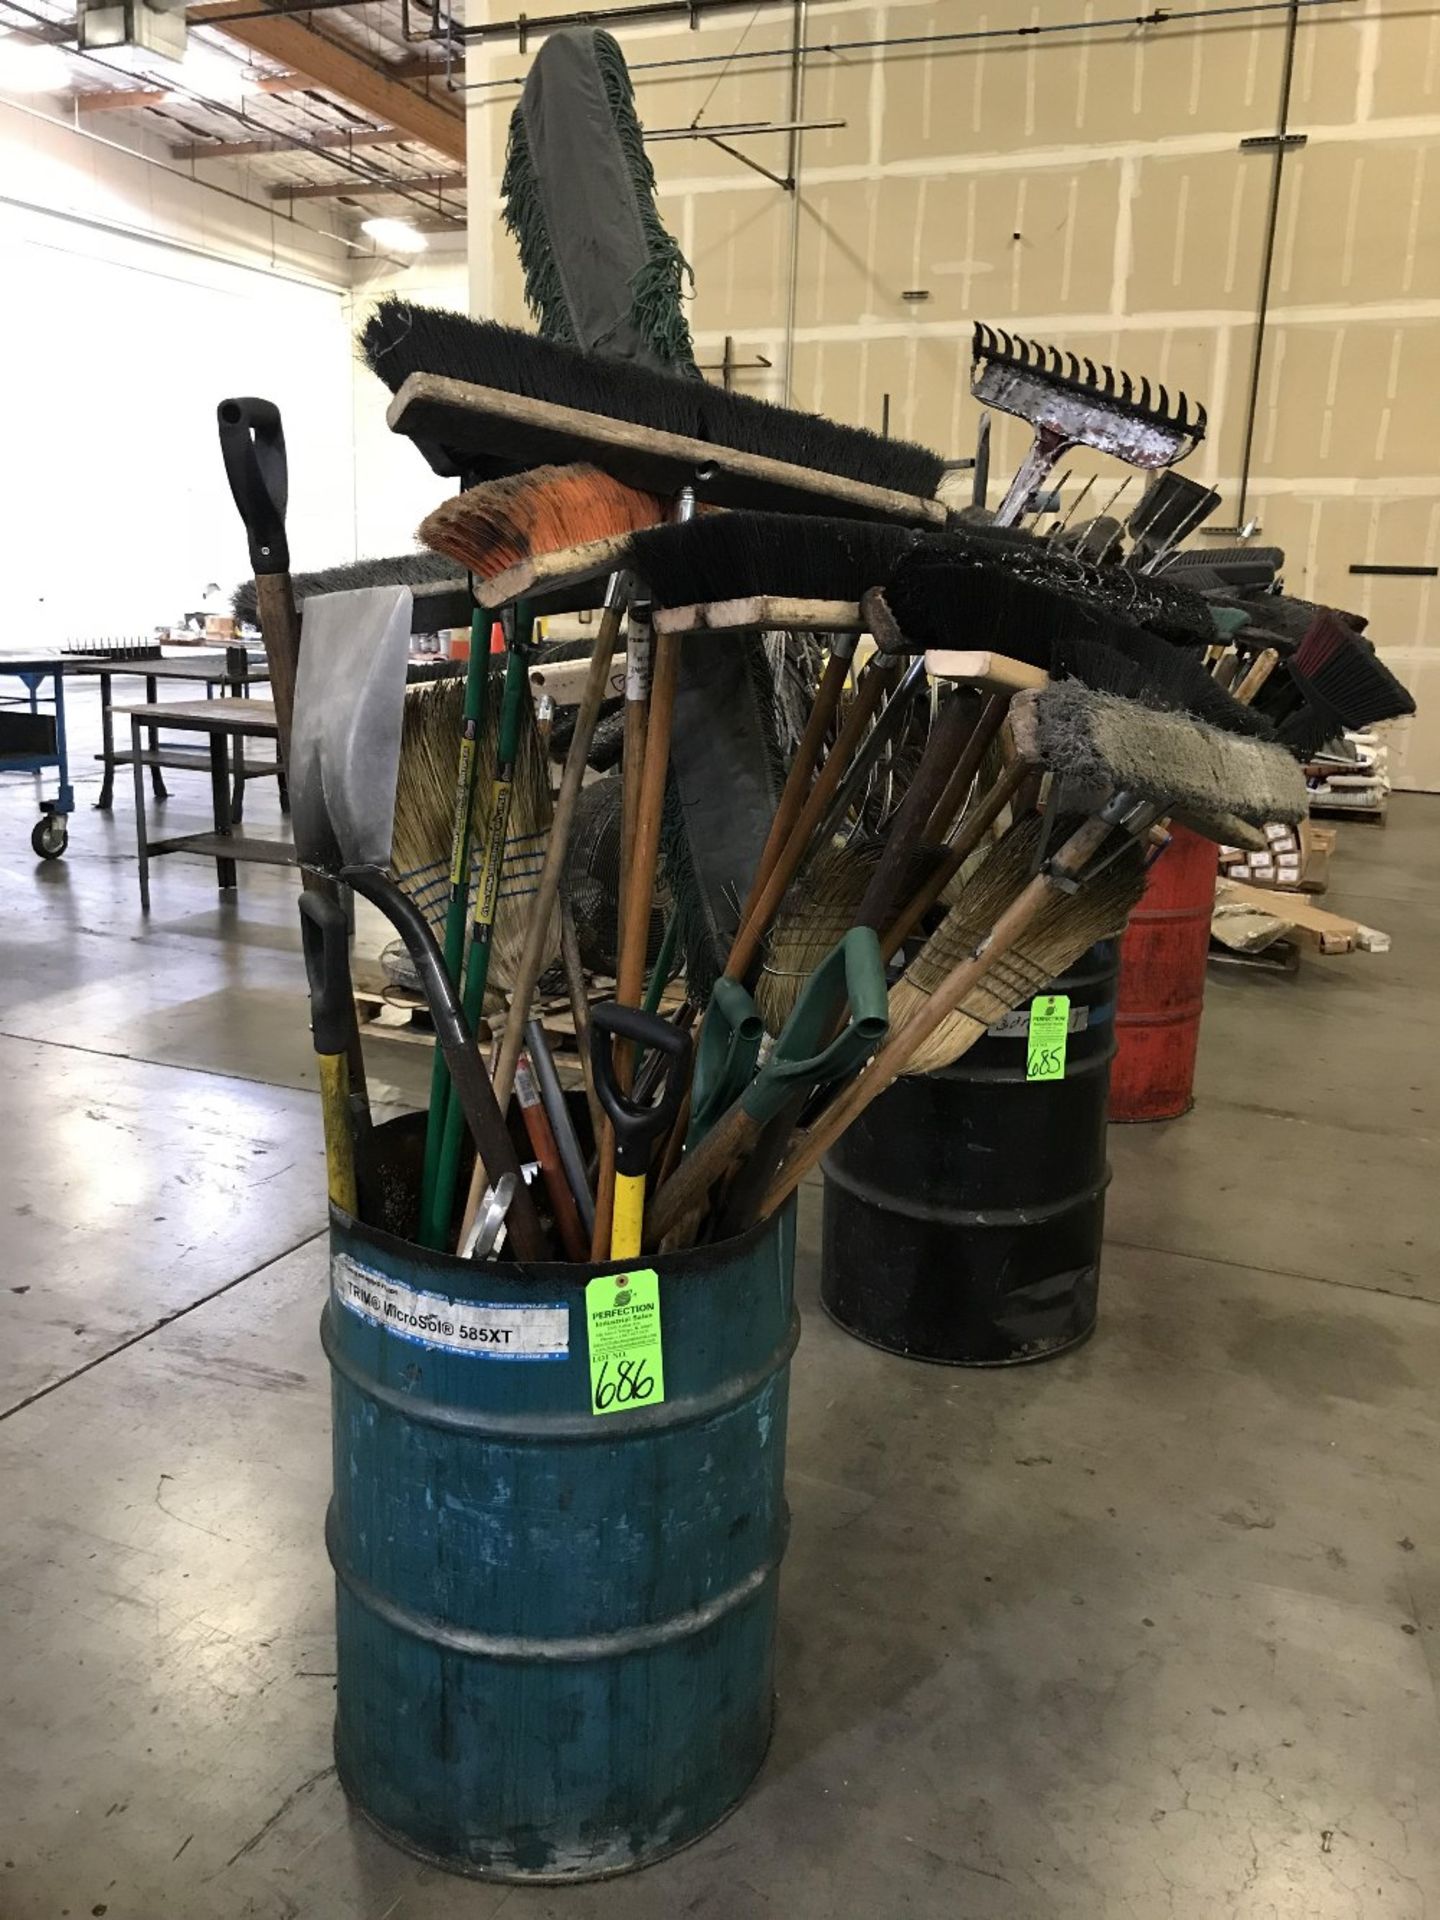 Drum of Assorted Push Brooms, Shovels, and Pitch Forks